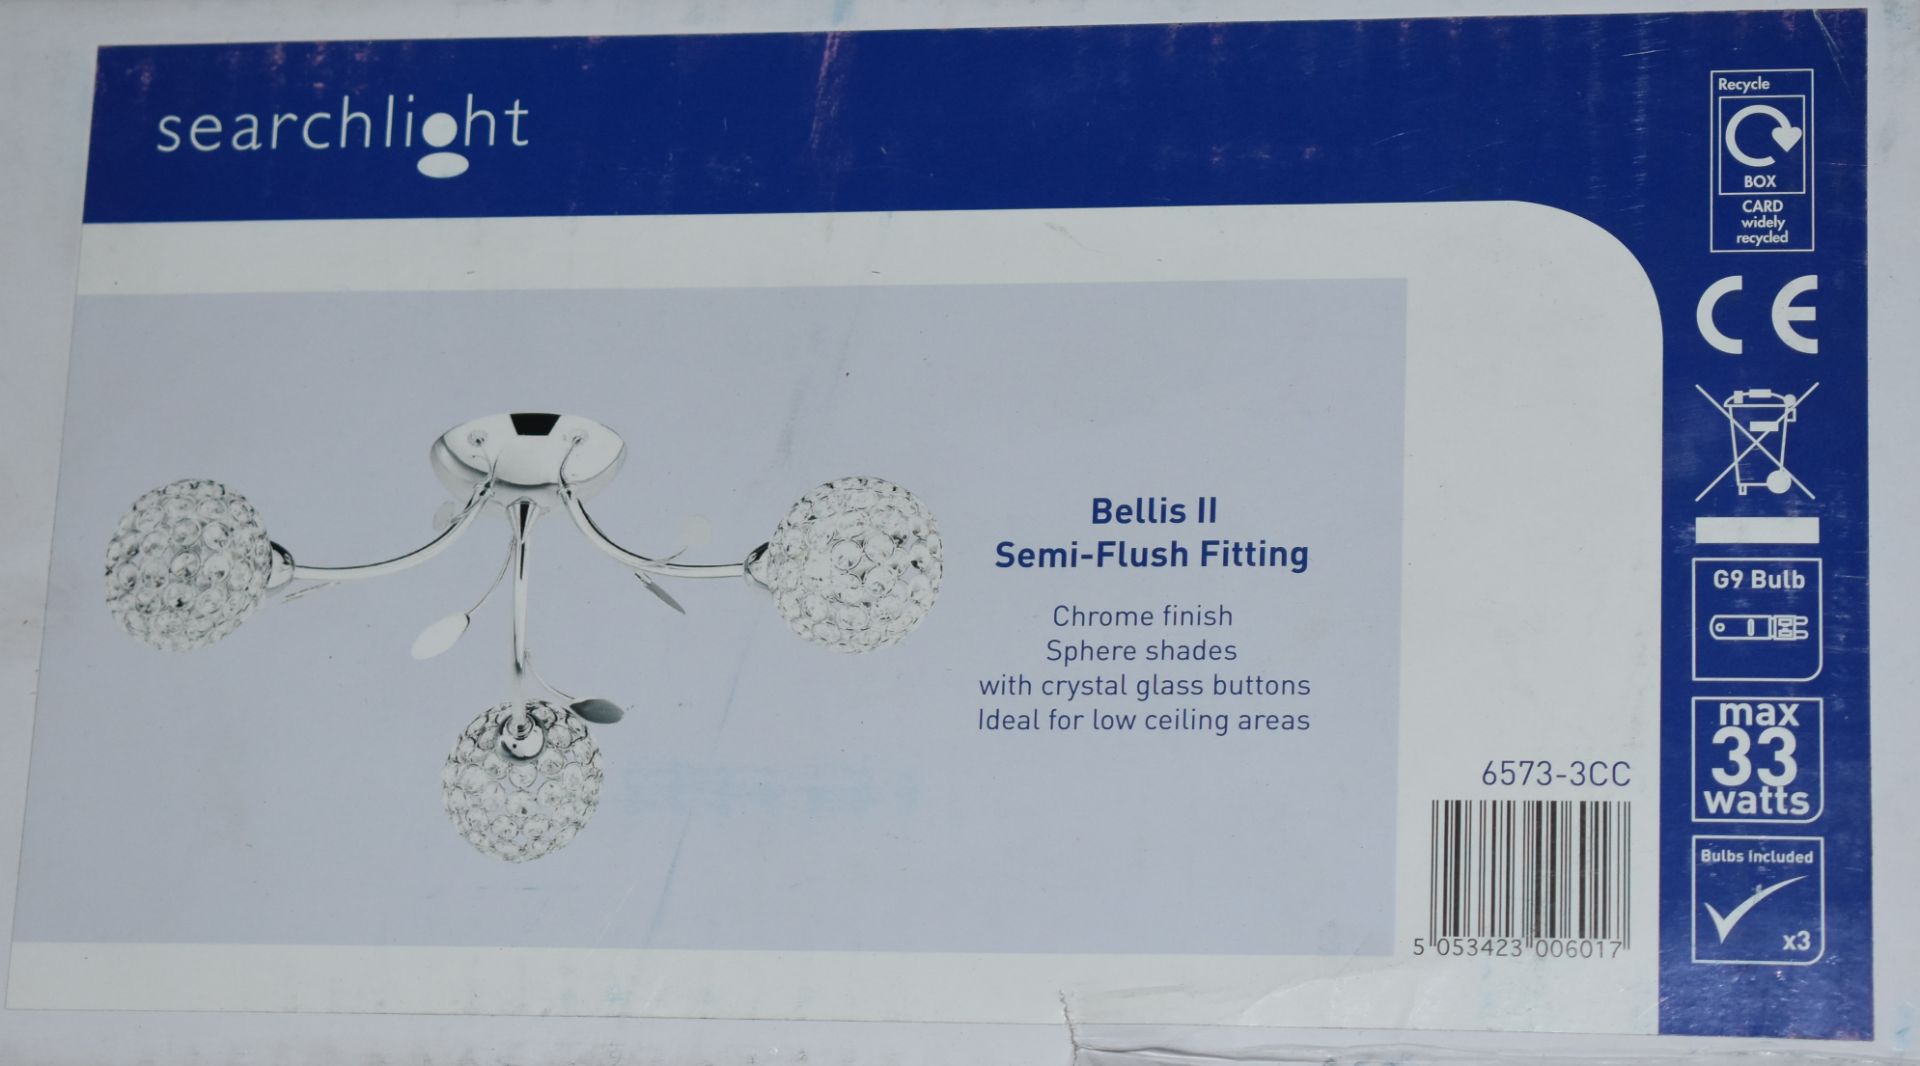 2 x Bellis II Semi Flush Ceiling Lights - Chrome Finish With Sphere Shades and Crystal Glass Buttons - Image 3 of 3